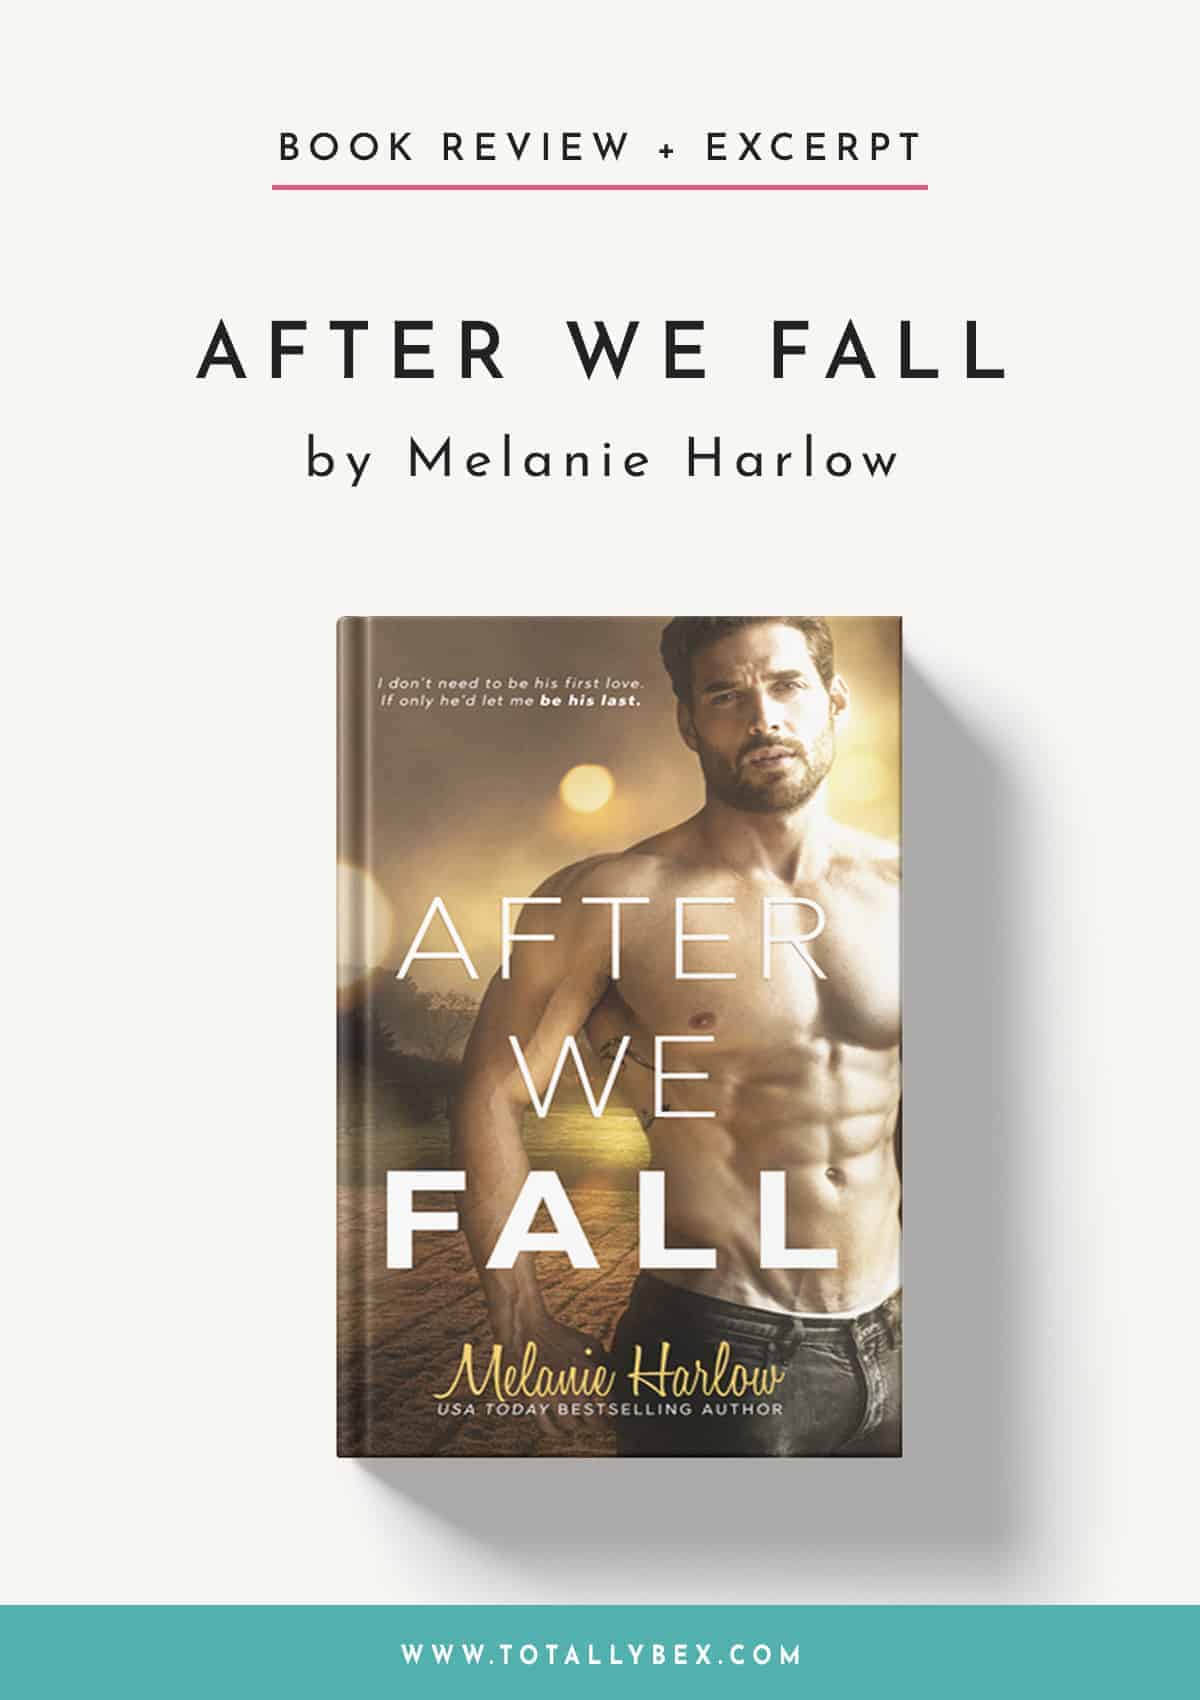 After We Fall by Melanie Harlow-Book Review+Excerpt